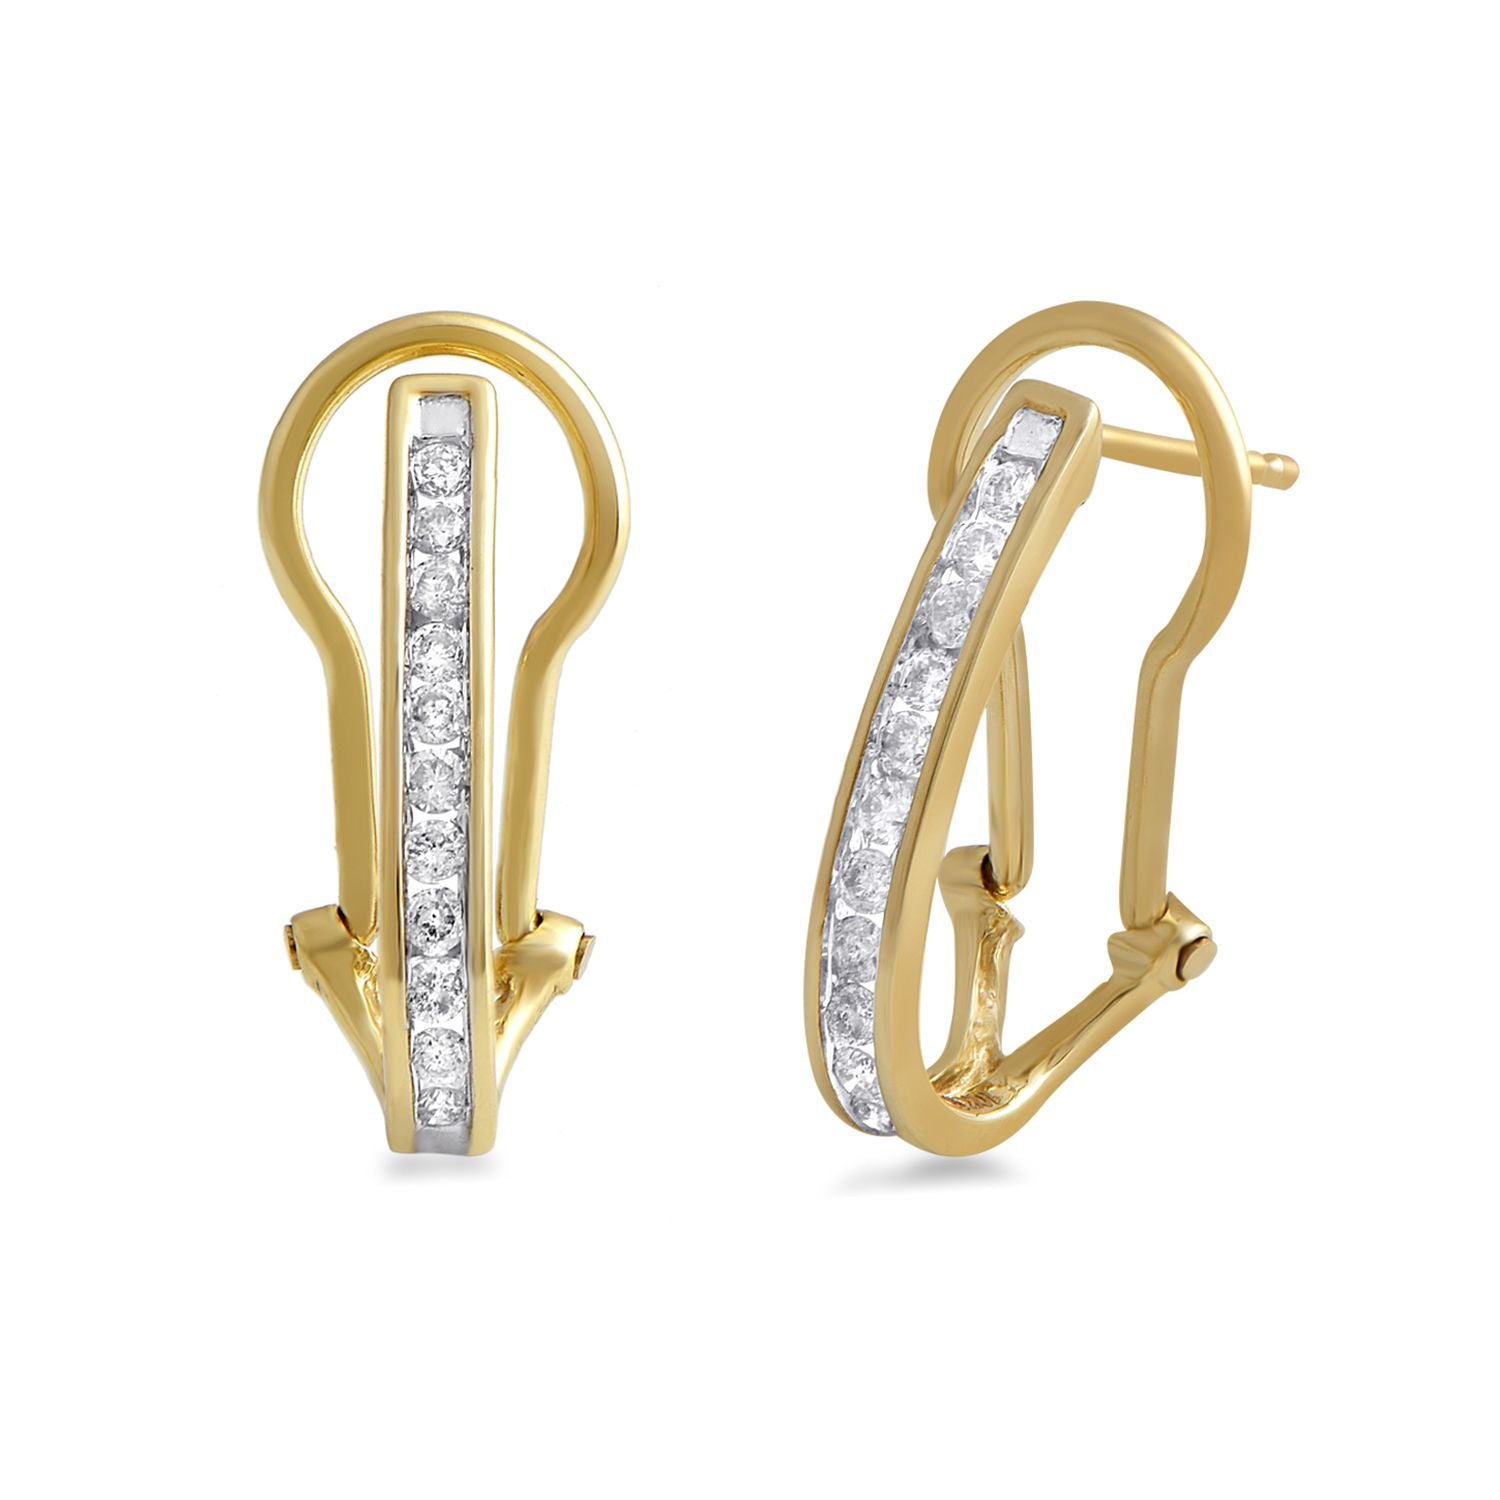 Jewelili Omega Back Earrings with Natural White Diamond in 10K Yellow Gold  1/4 CTTW